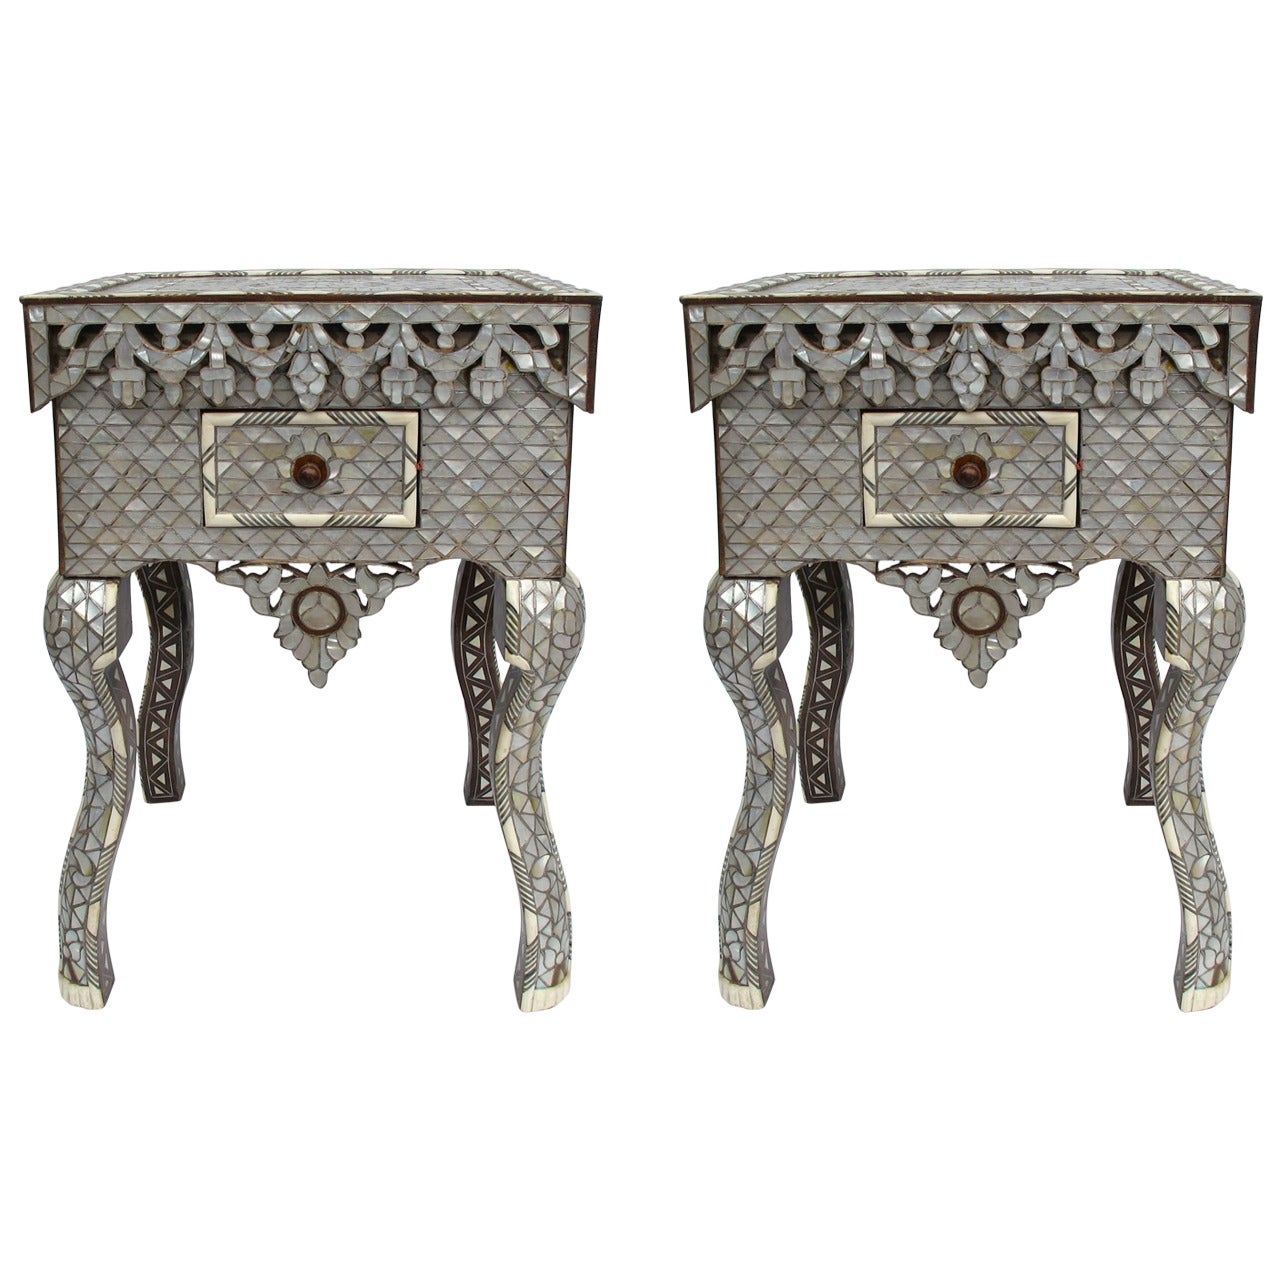 Pair of Mother-of-Pearl Inlay Side Tables, Syrian